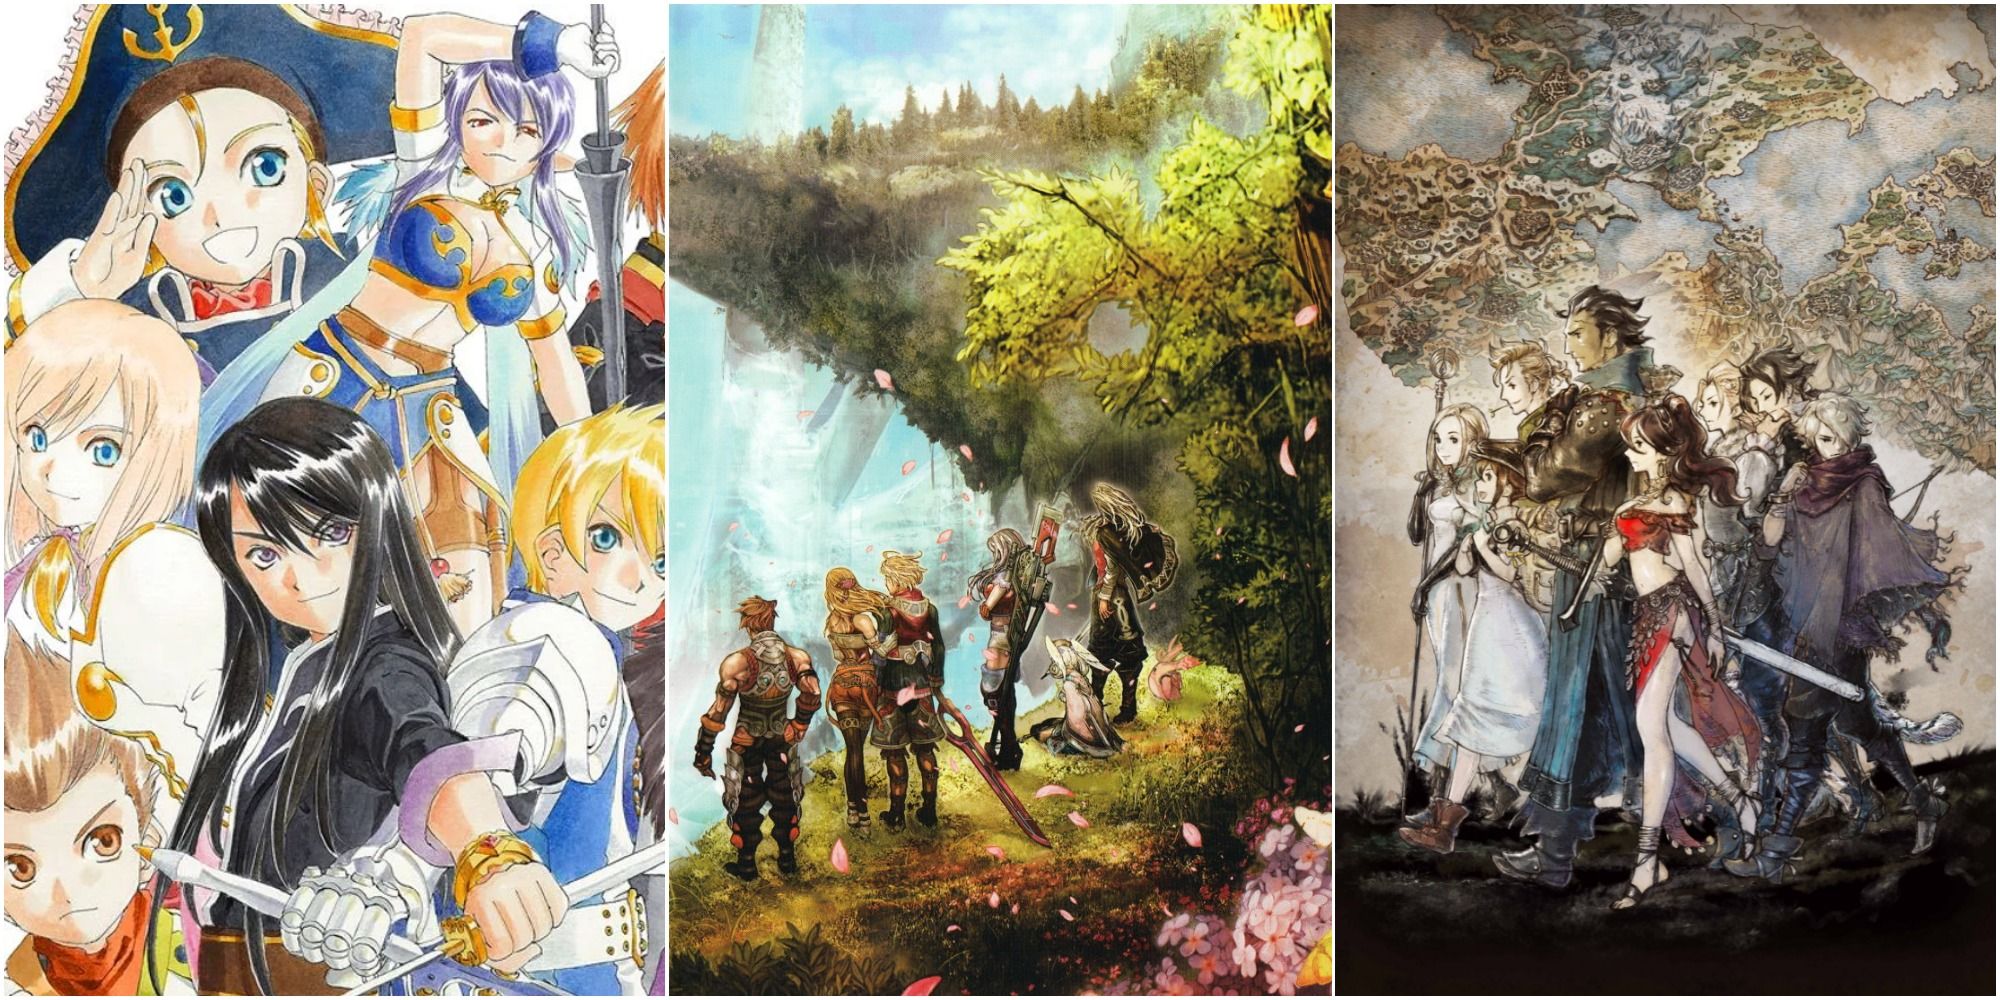 Split image screenshots of the Tales of Vesperia cast, Xenoblade Chronicles cast and Octopath Traveler cast.